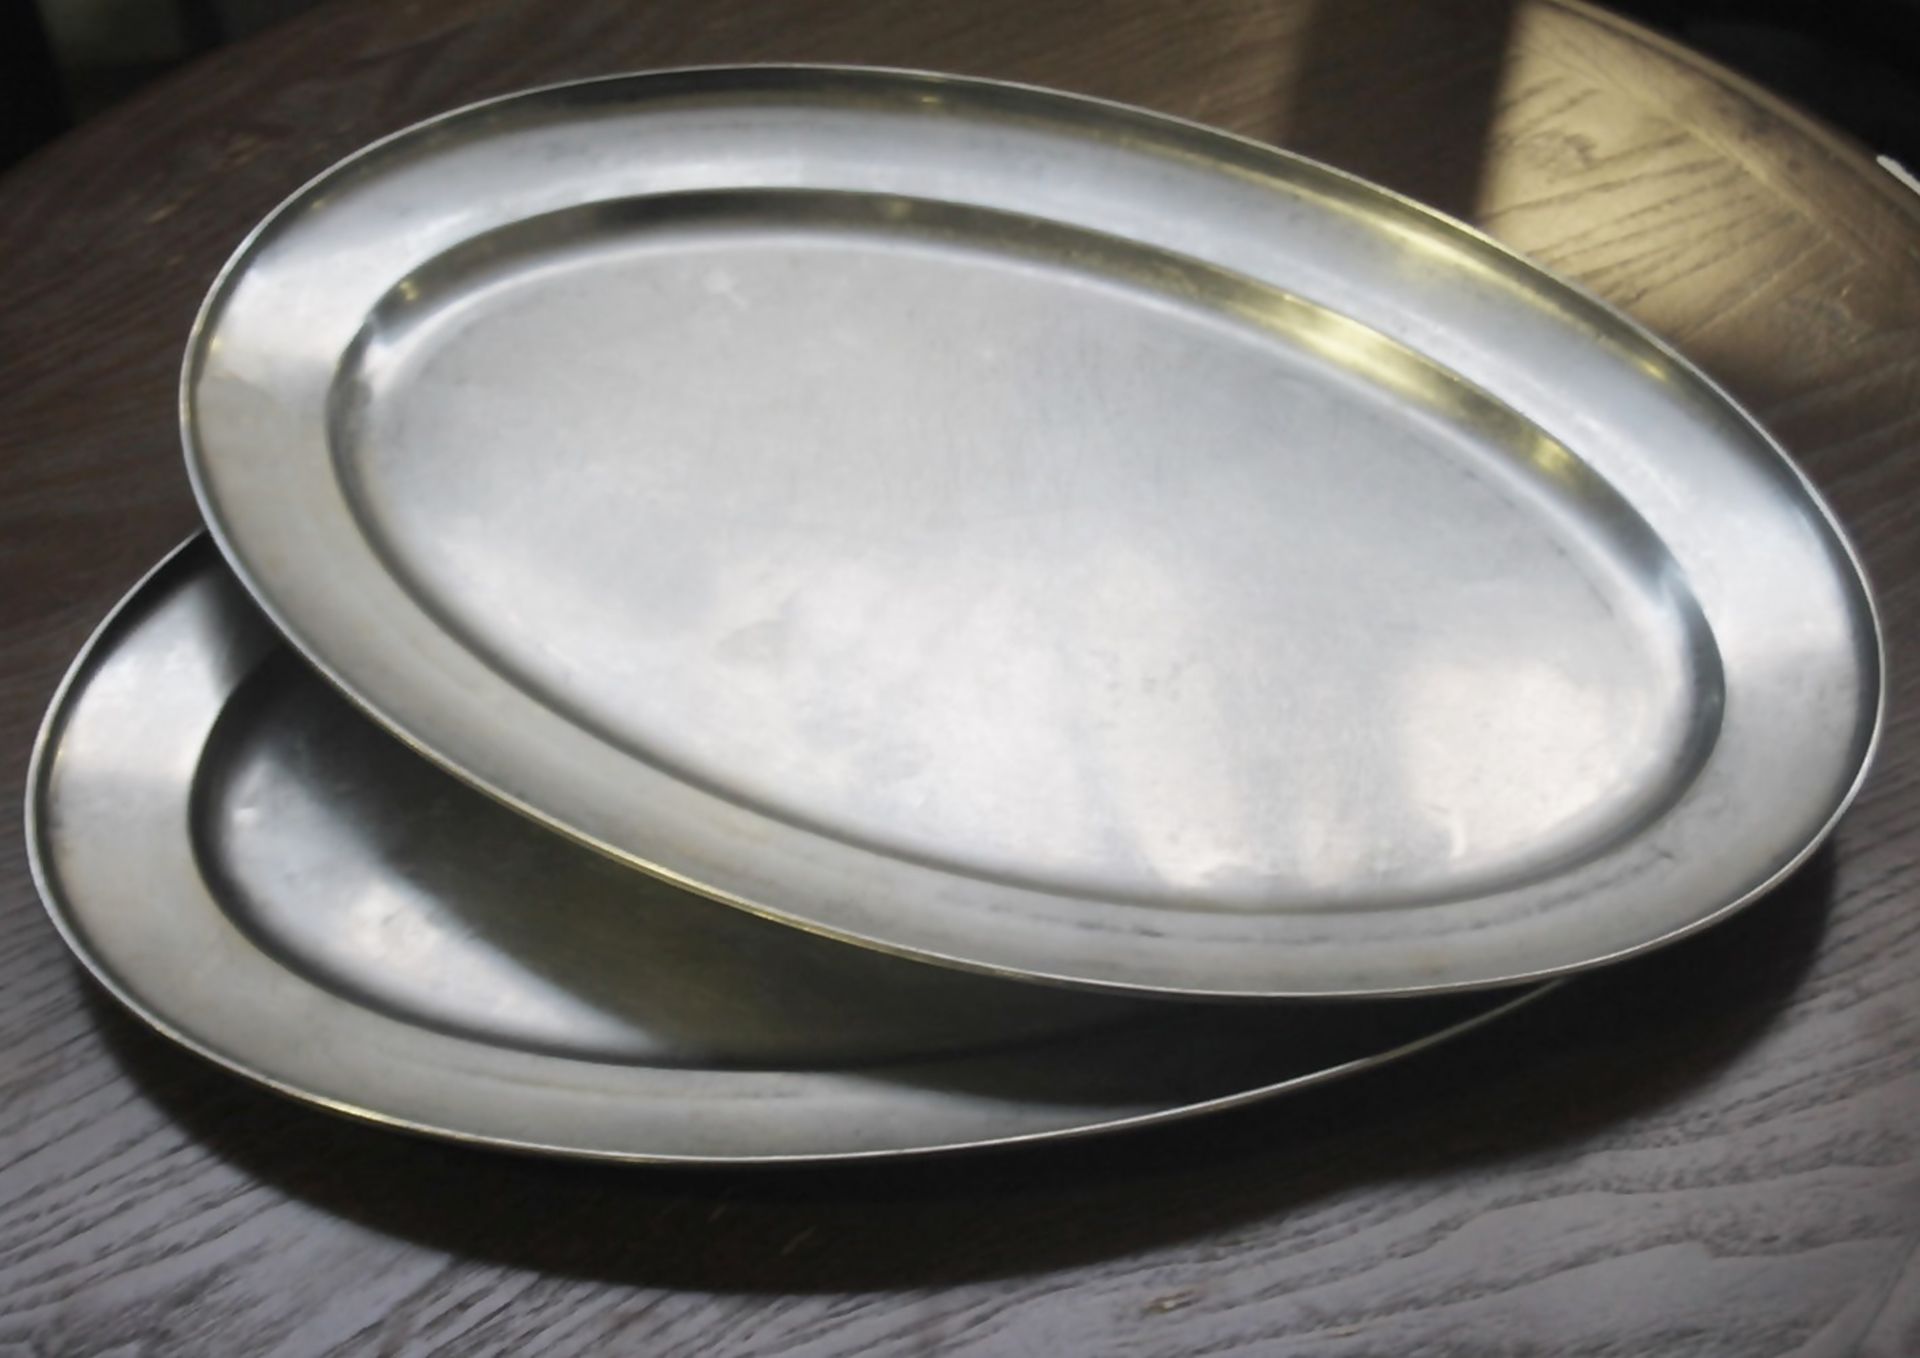 50 x Stainless Steel Oval Restaurant Serving Tray Platters - Dimensions (approx): 45 x 29cm - - Image 3 of 4